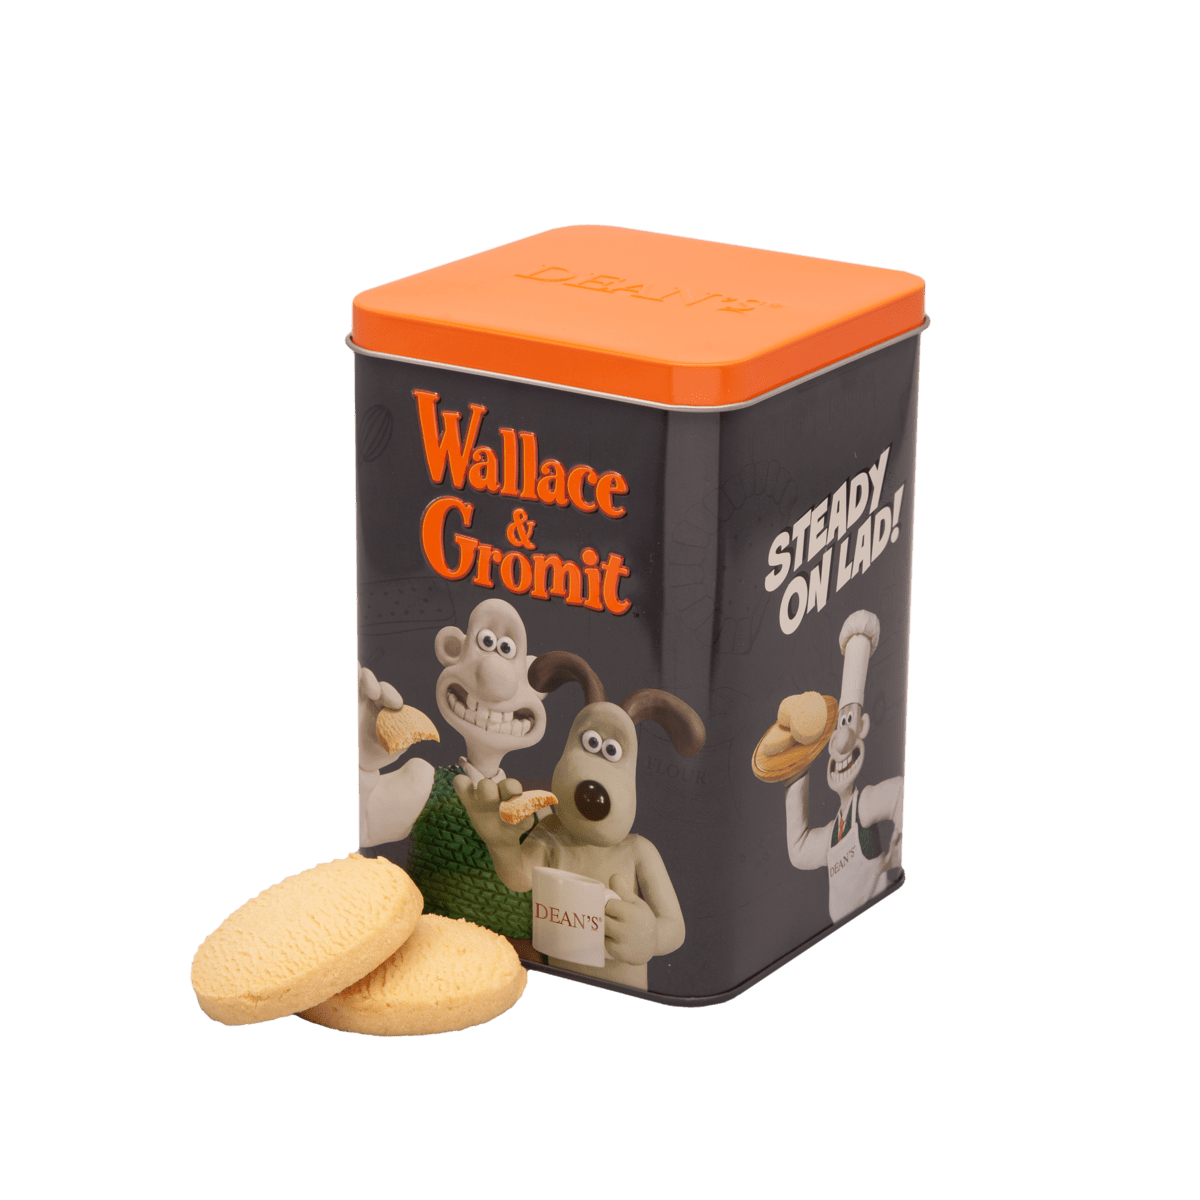 Buy the Wallace & Gromit "Steady on" All Butter Shortbread Rounds 300g online at Dean's